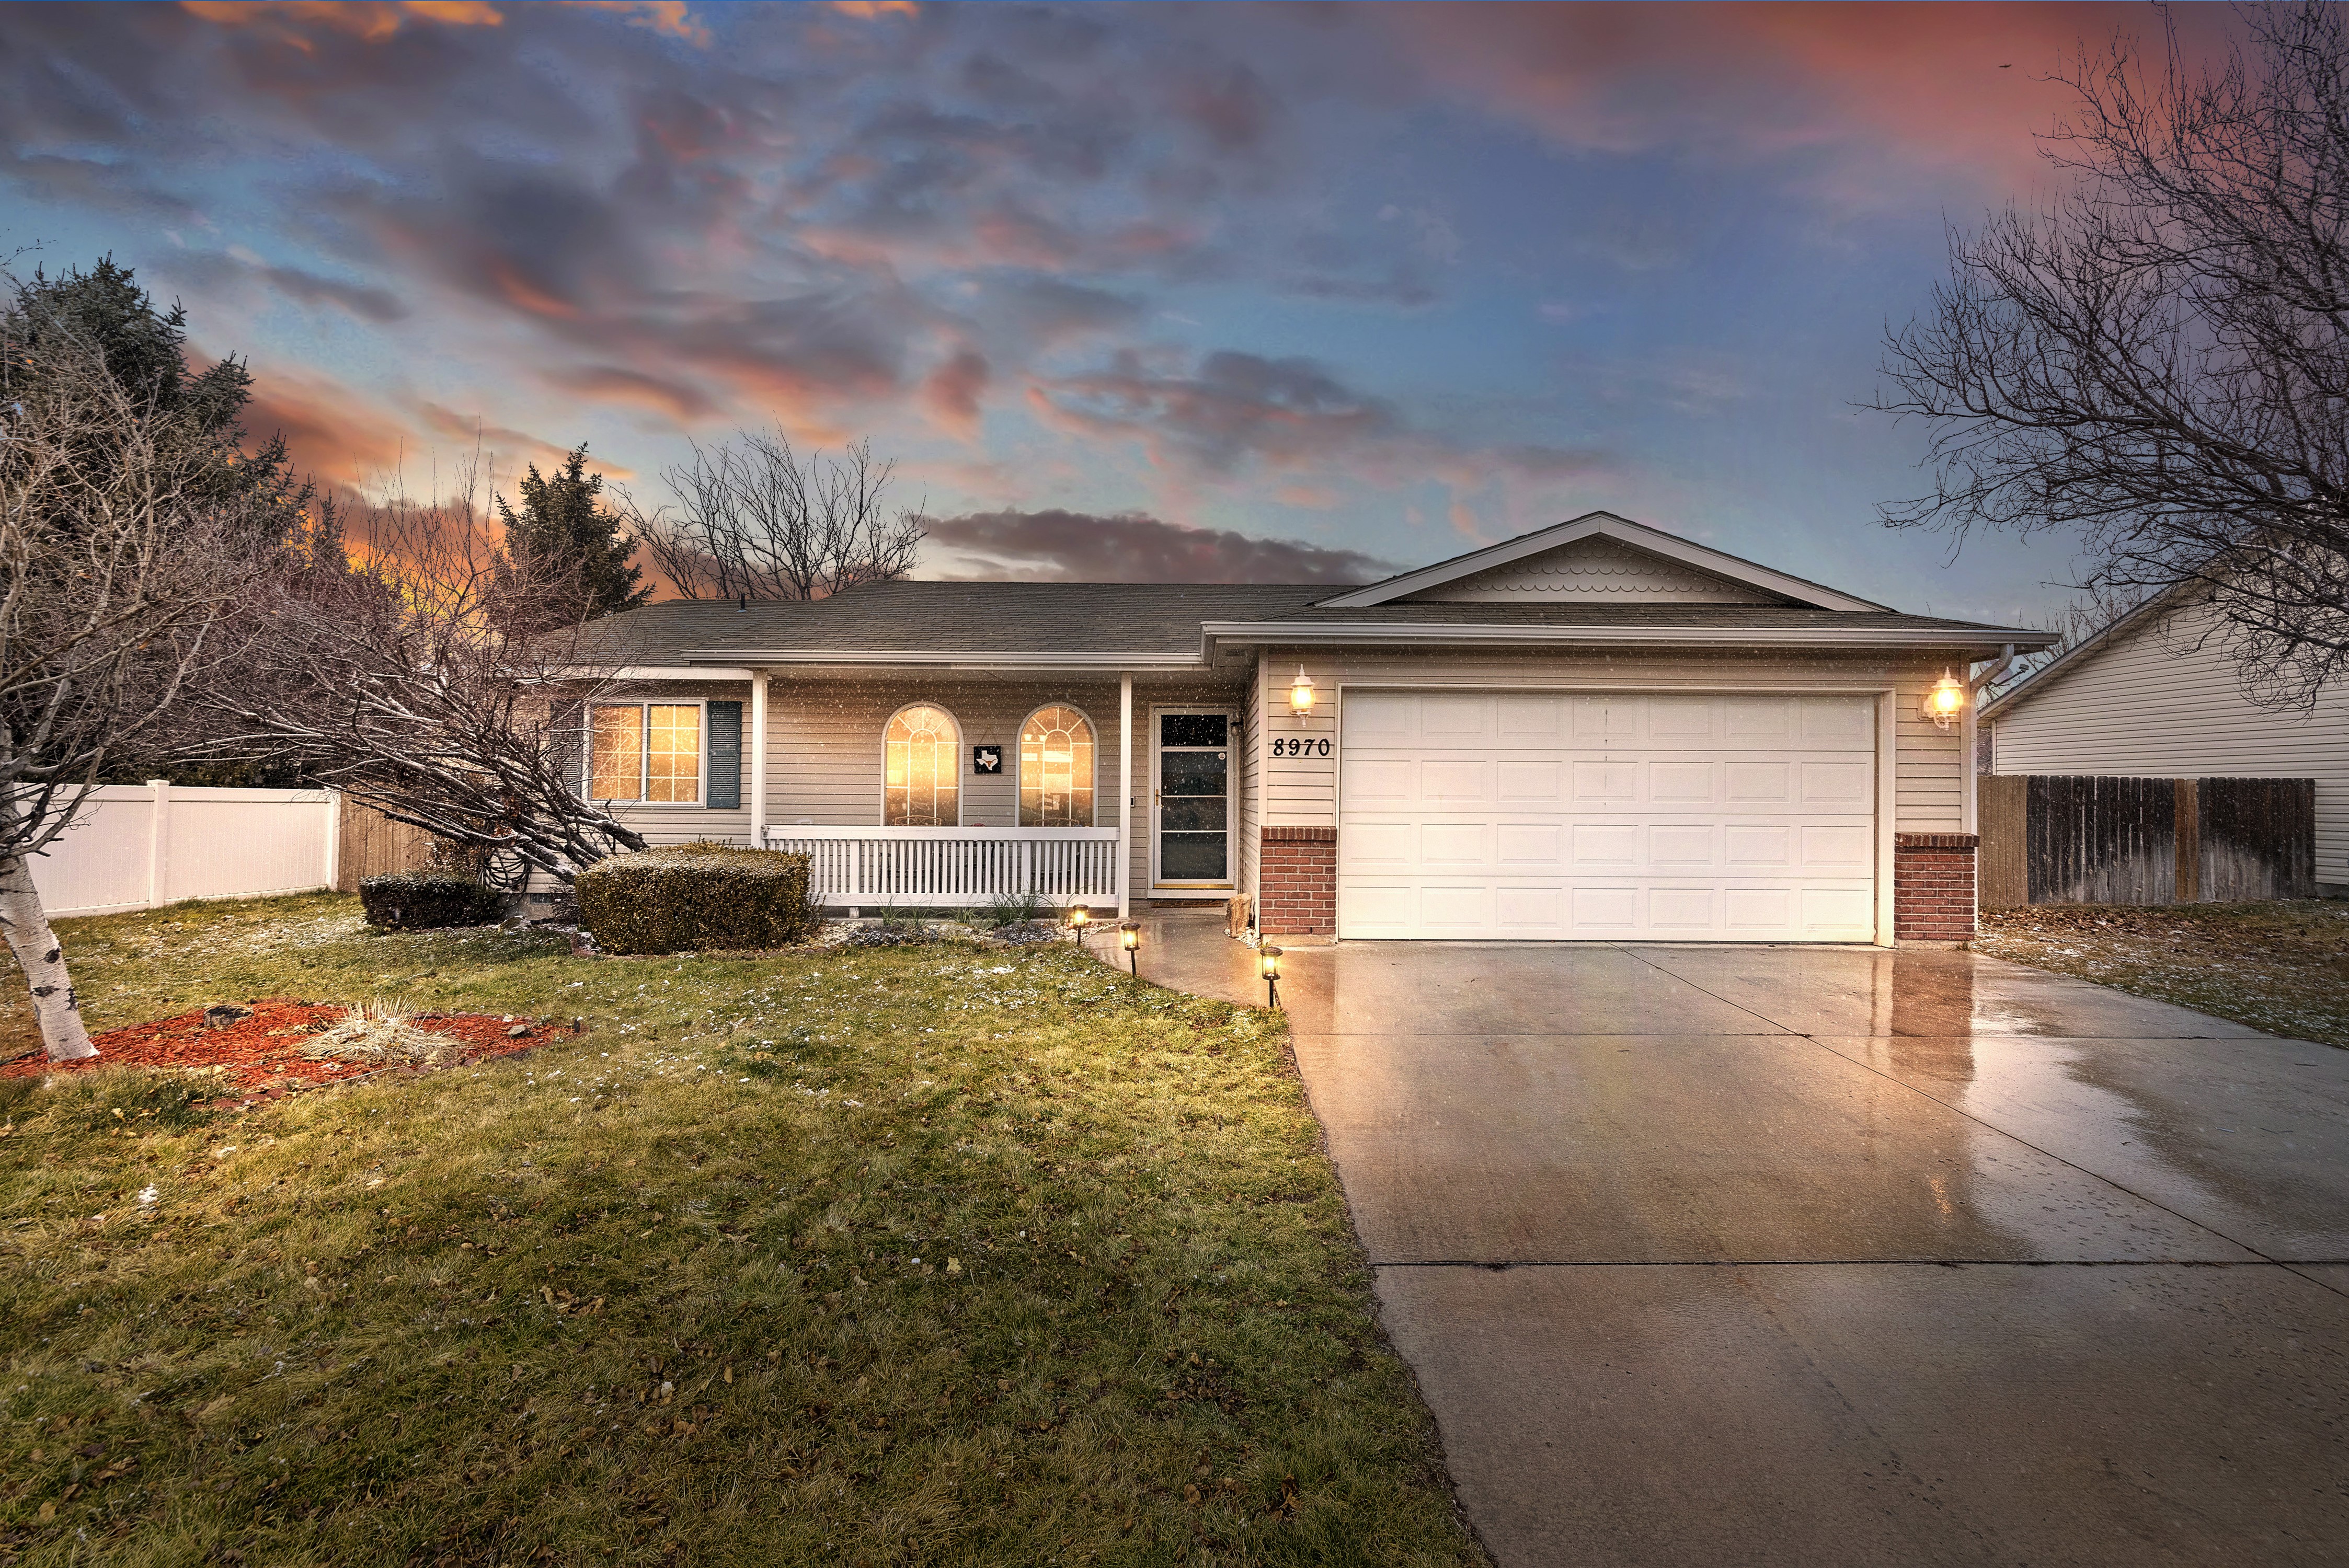 Centrally-Located Boise Home - Now SOLD ! This one went fast!